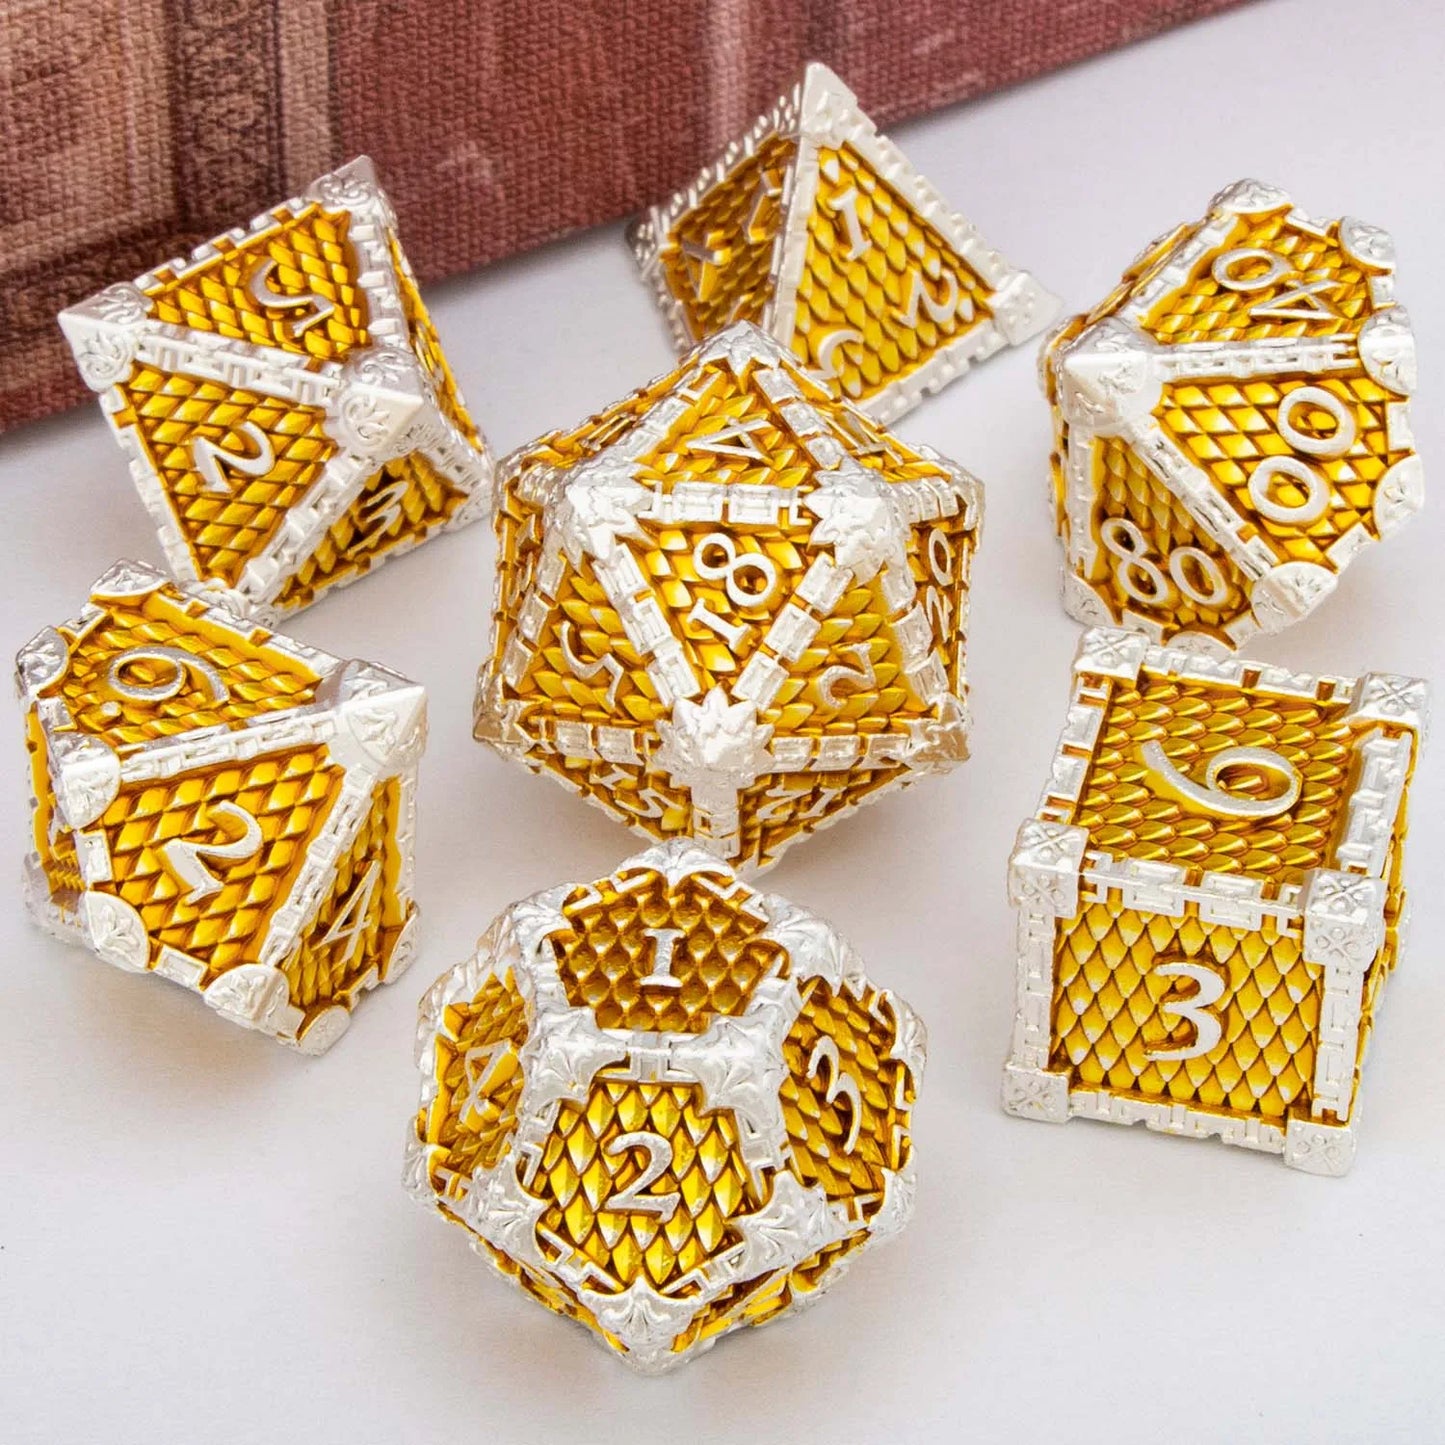 DND Metal Dice Set Dragon Scale D&D Dice Dungeon and Dragon Role Playing Games Black Green Polyhedral Dice RPG D and D Dice Silver Yellow